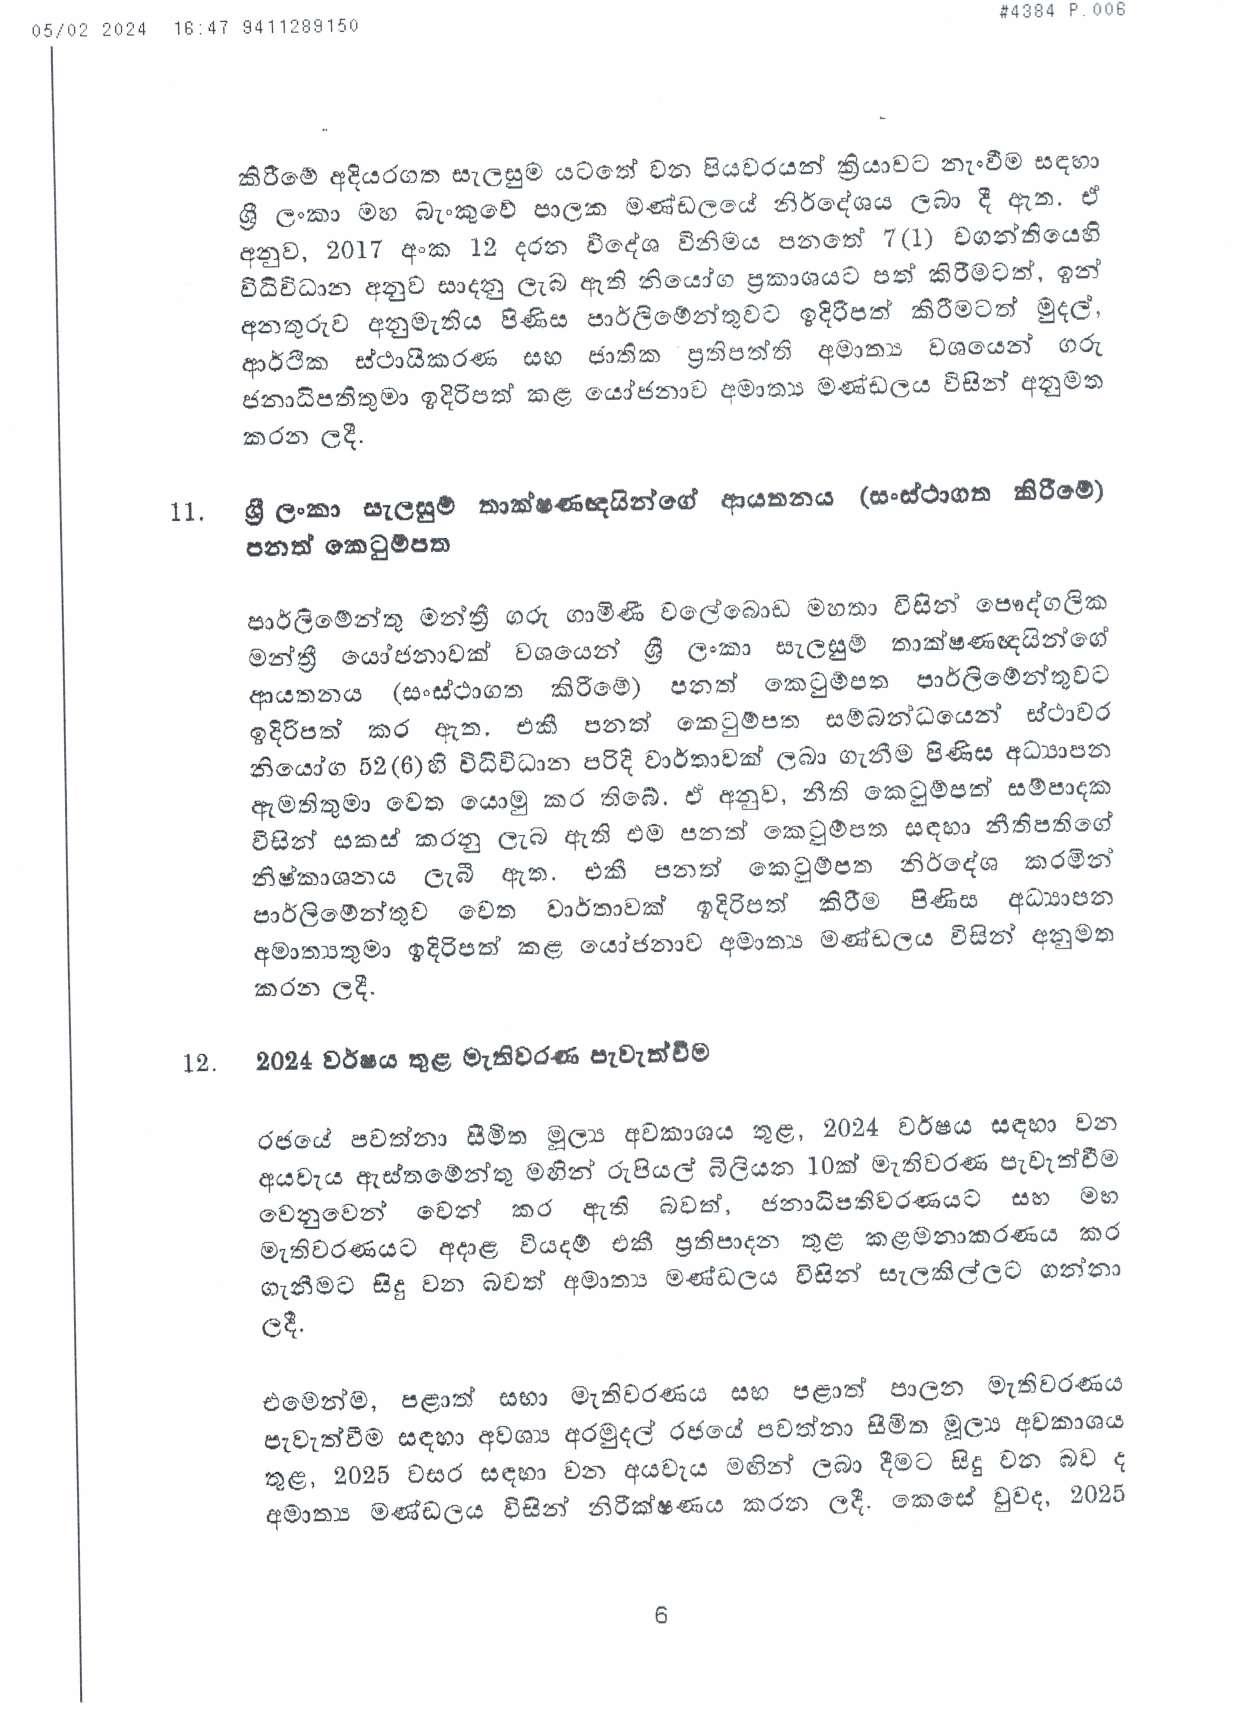 Cabinet Decision on 05.02.2024 page 006